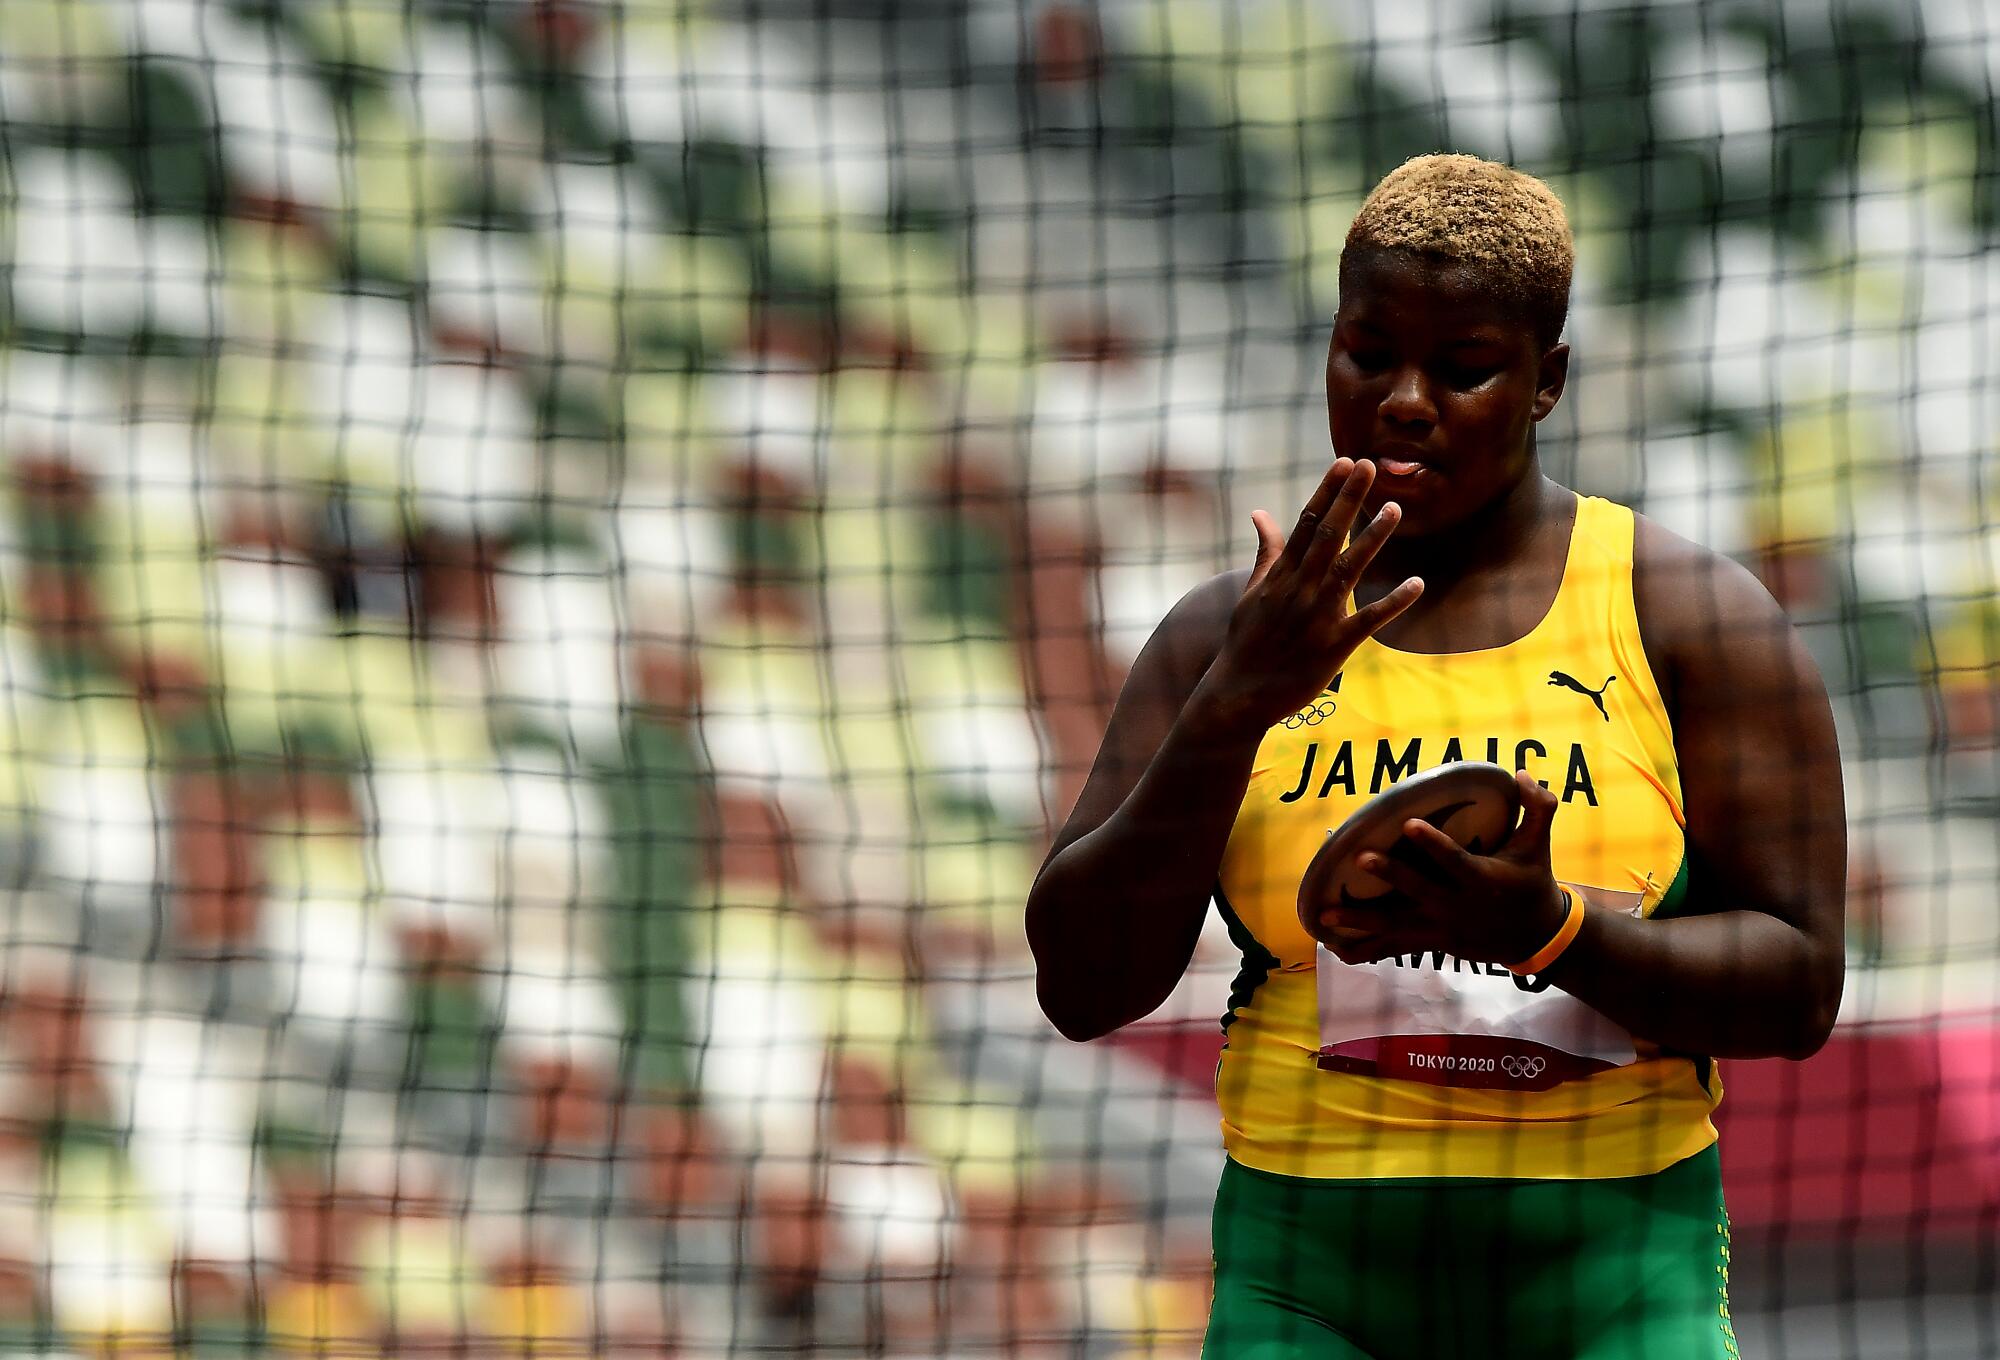 Jamaica's Shadae Lawrence prepares to make a throw in the women's discus throw qualifying.